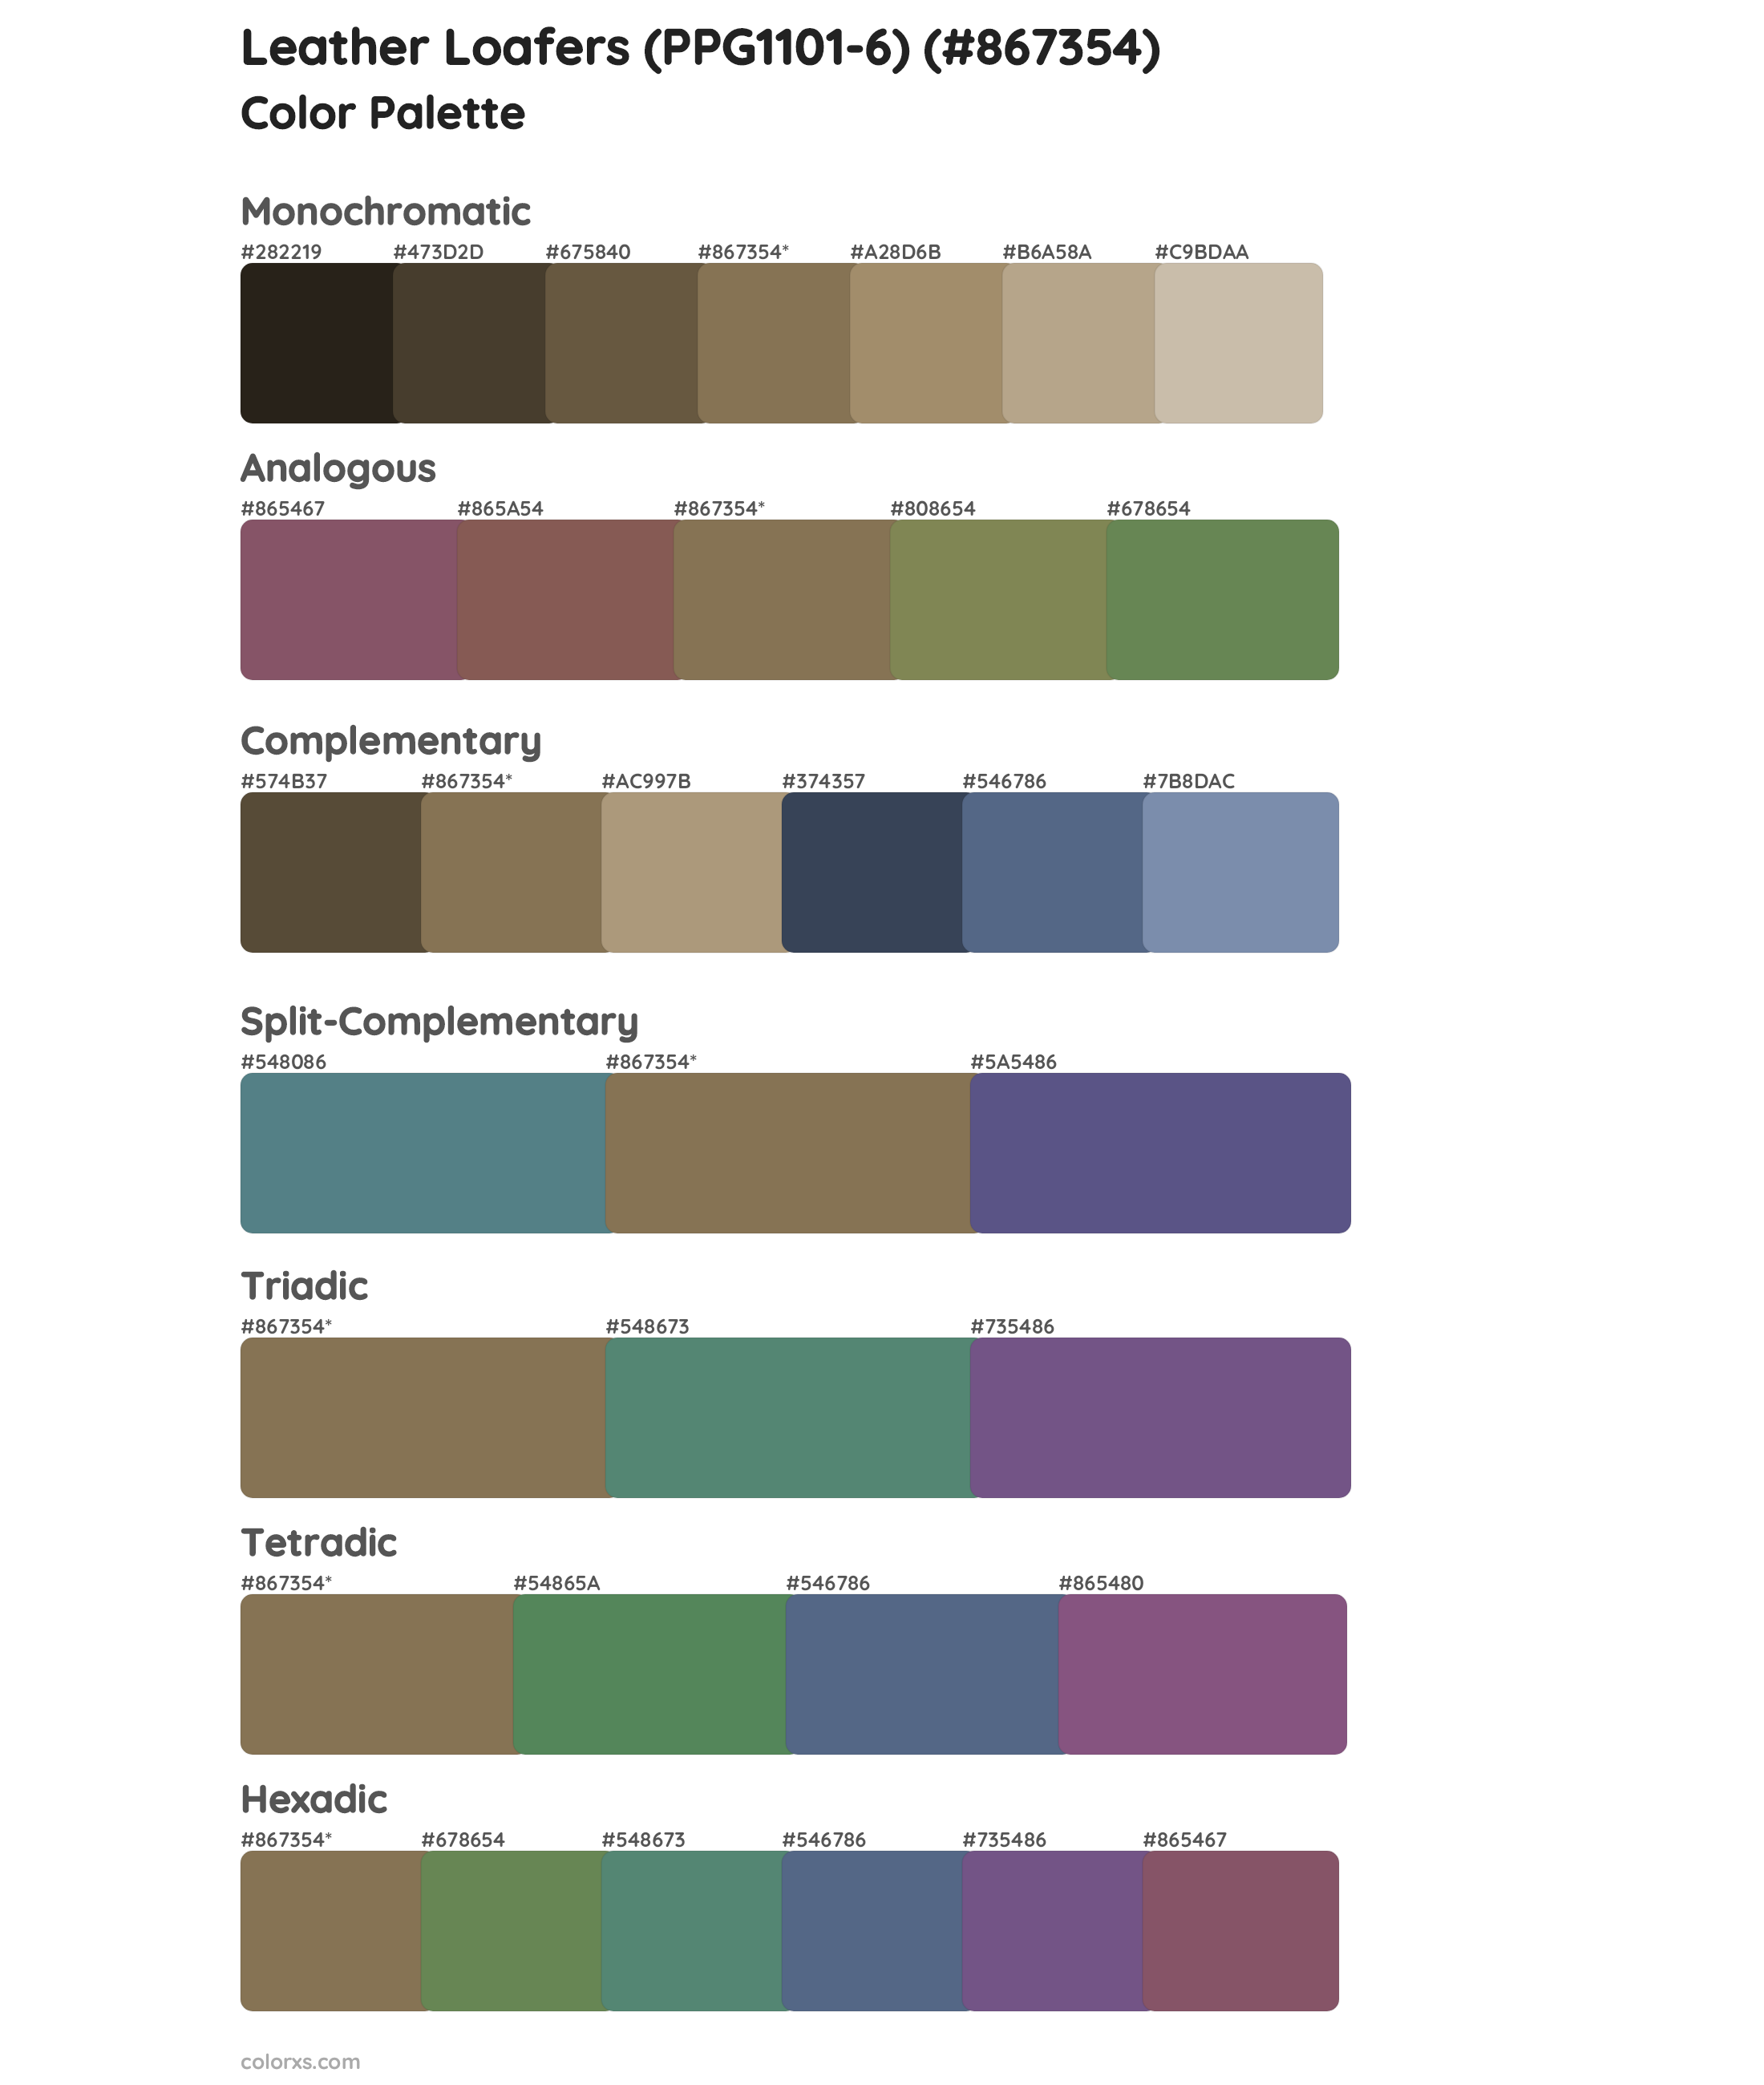 Leather Loafers (PPG1101-6) Color Scheme Palettes